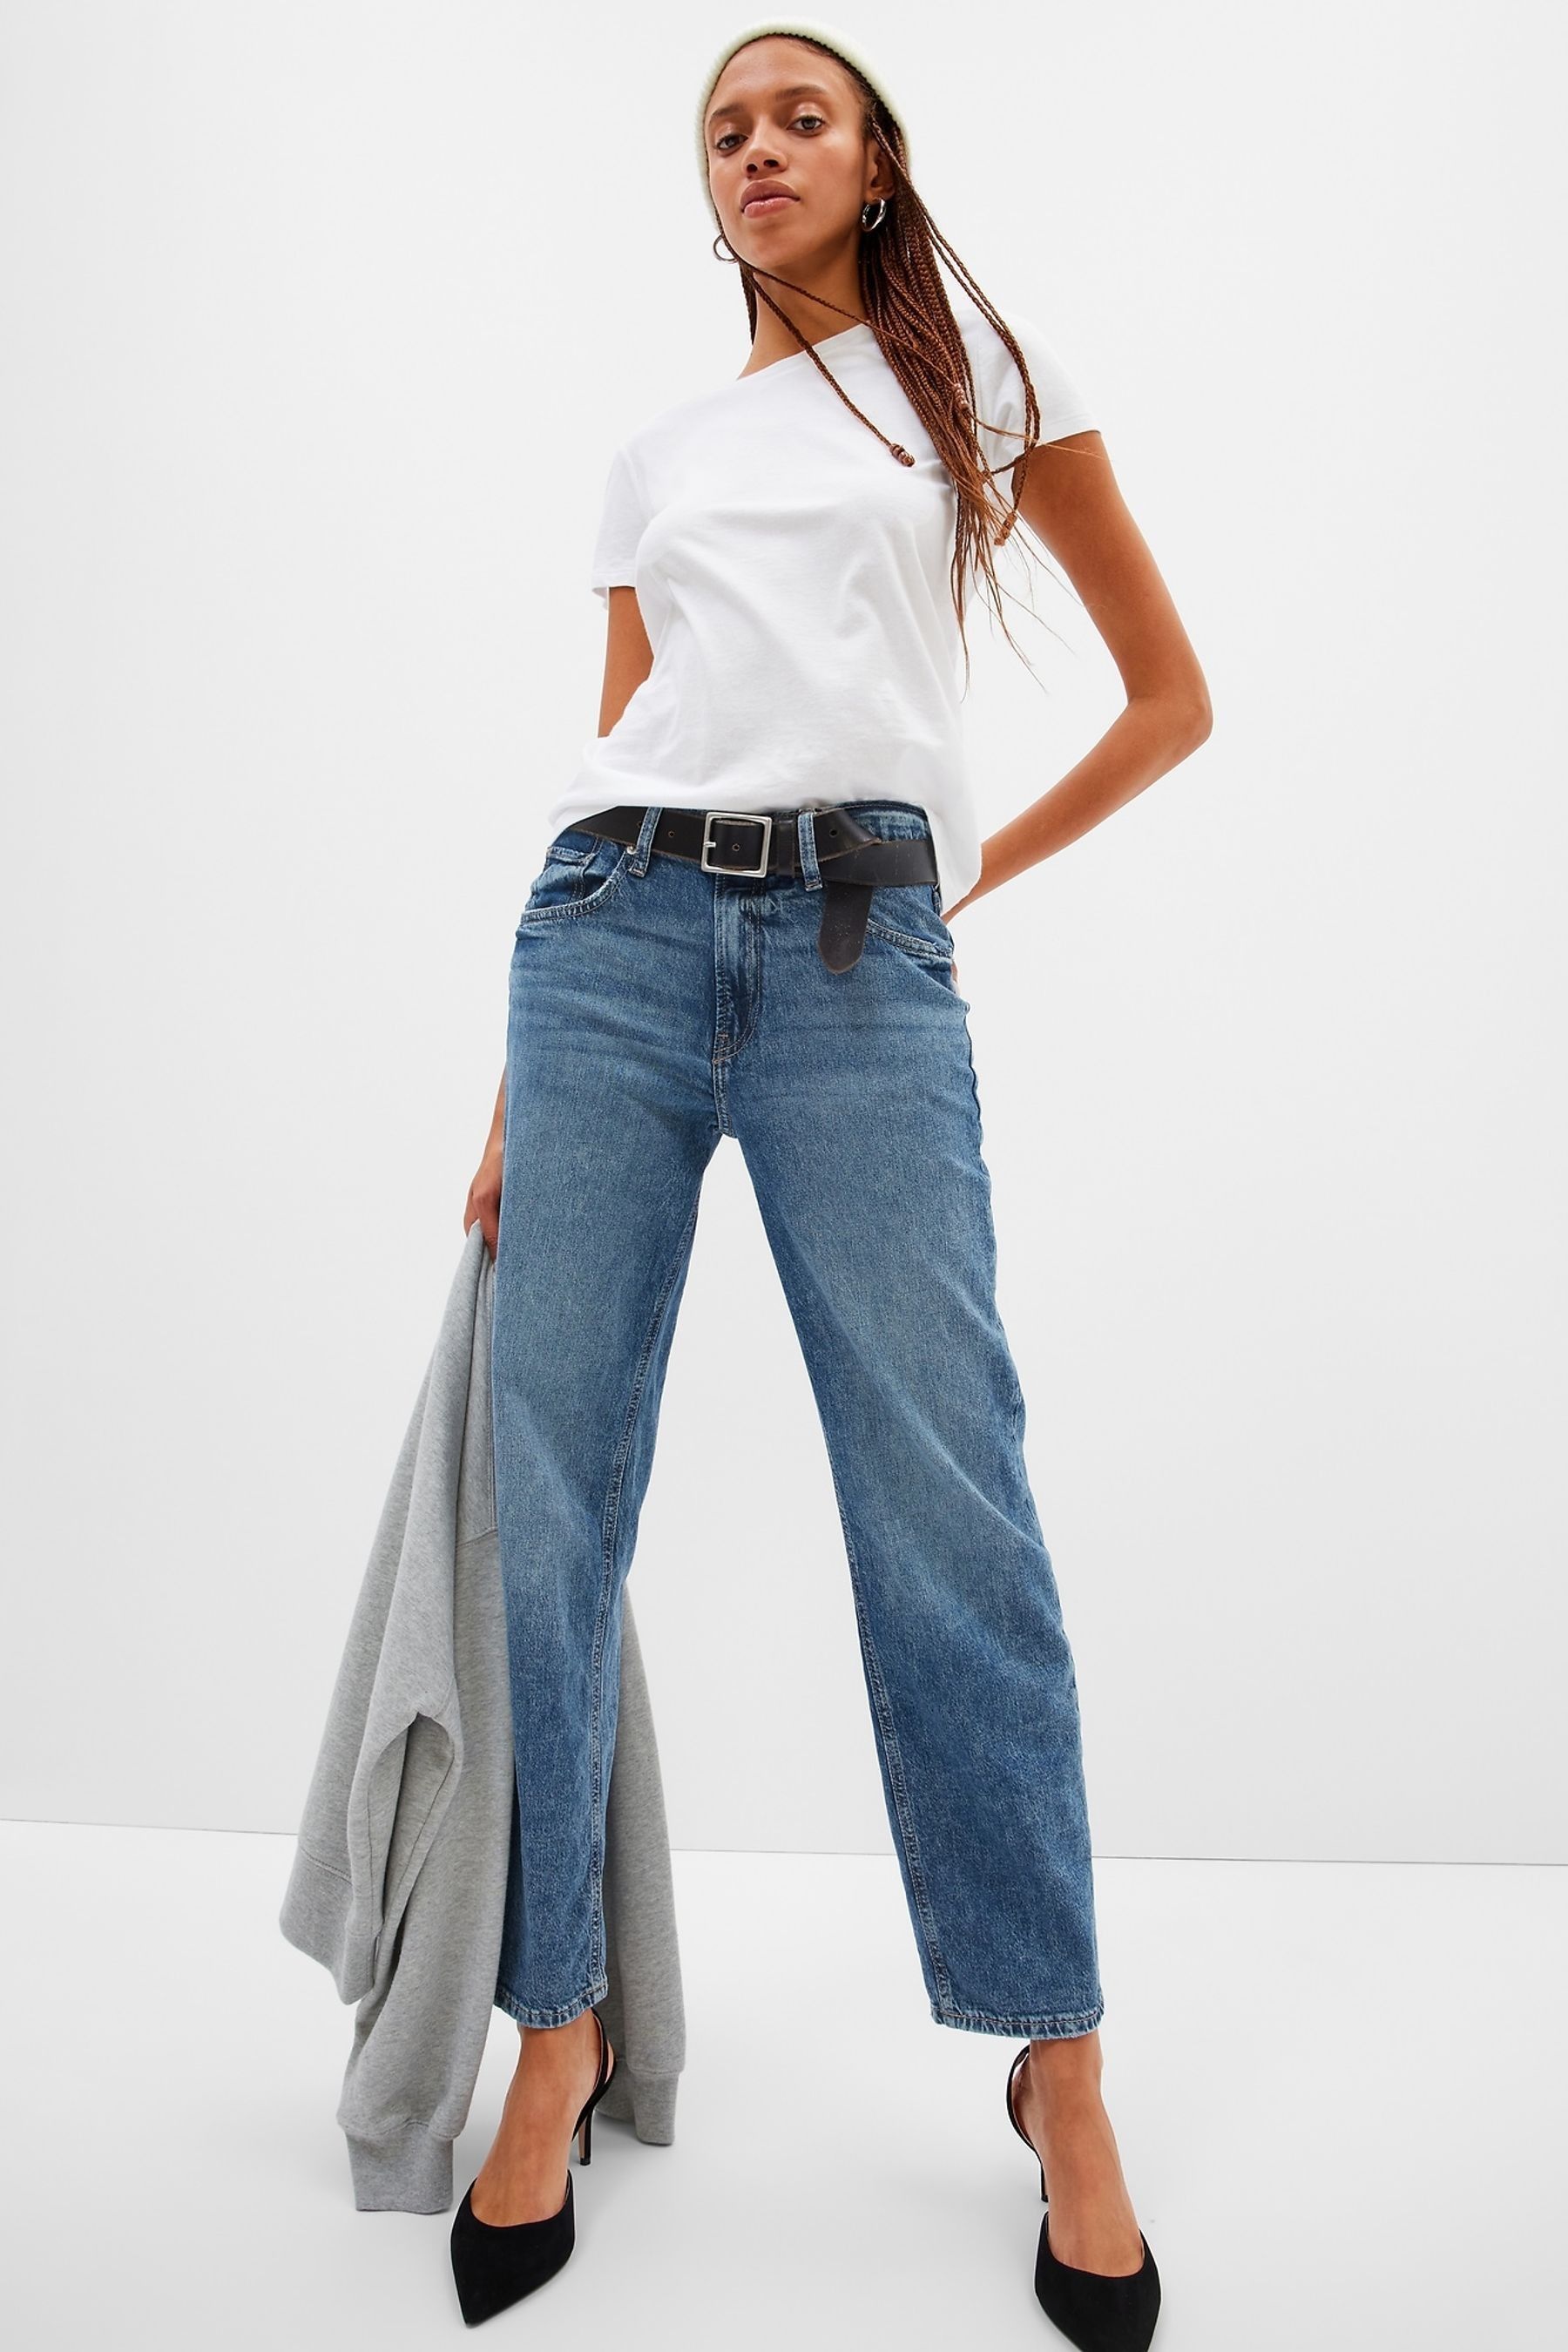 I Exclusively Wear Straight-Leg Jeans—These Are the Best | Who What Wear UK